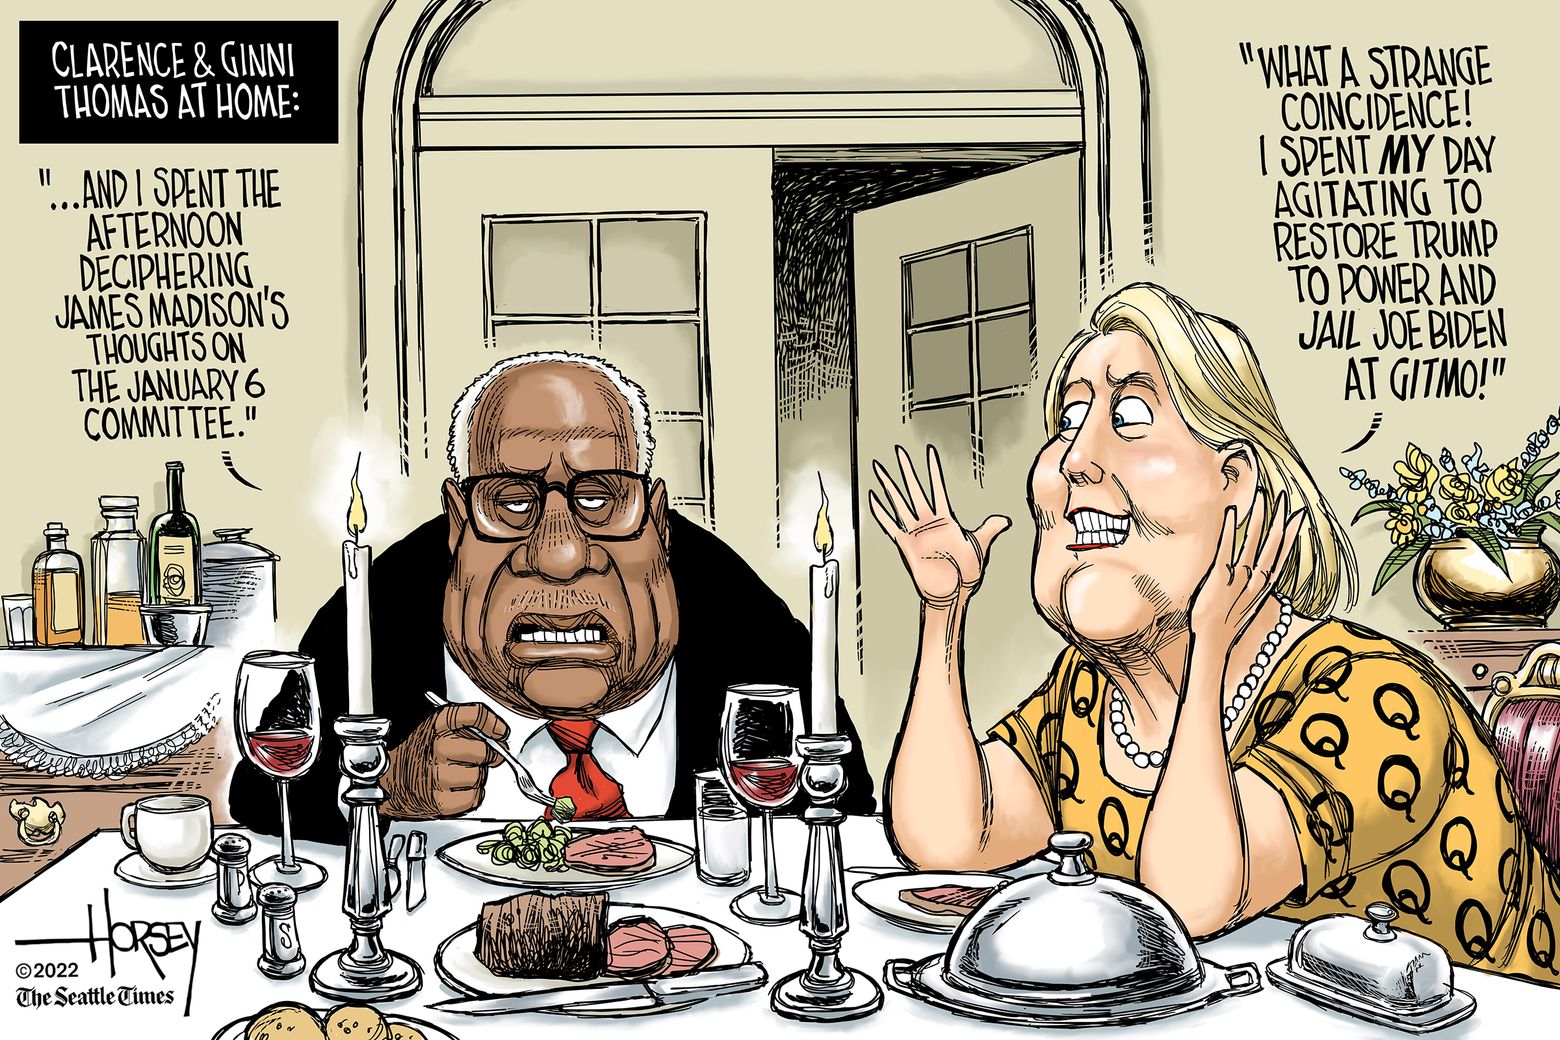 Dinner-table chitchat with Ginni and Clarence Thomas | The Seattle Times